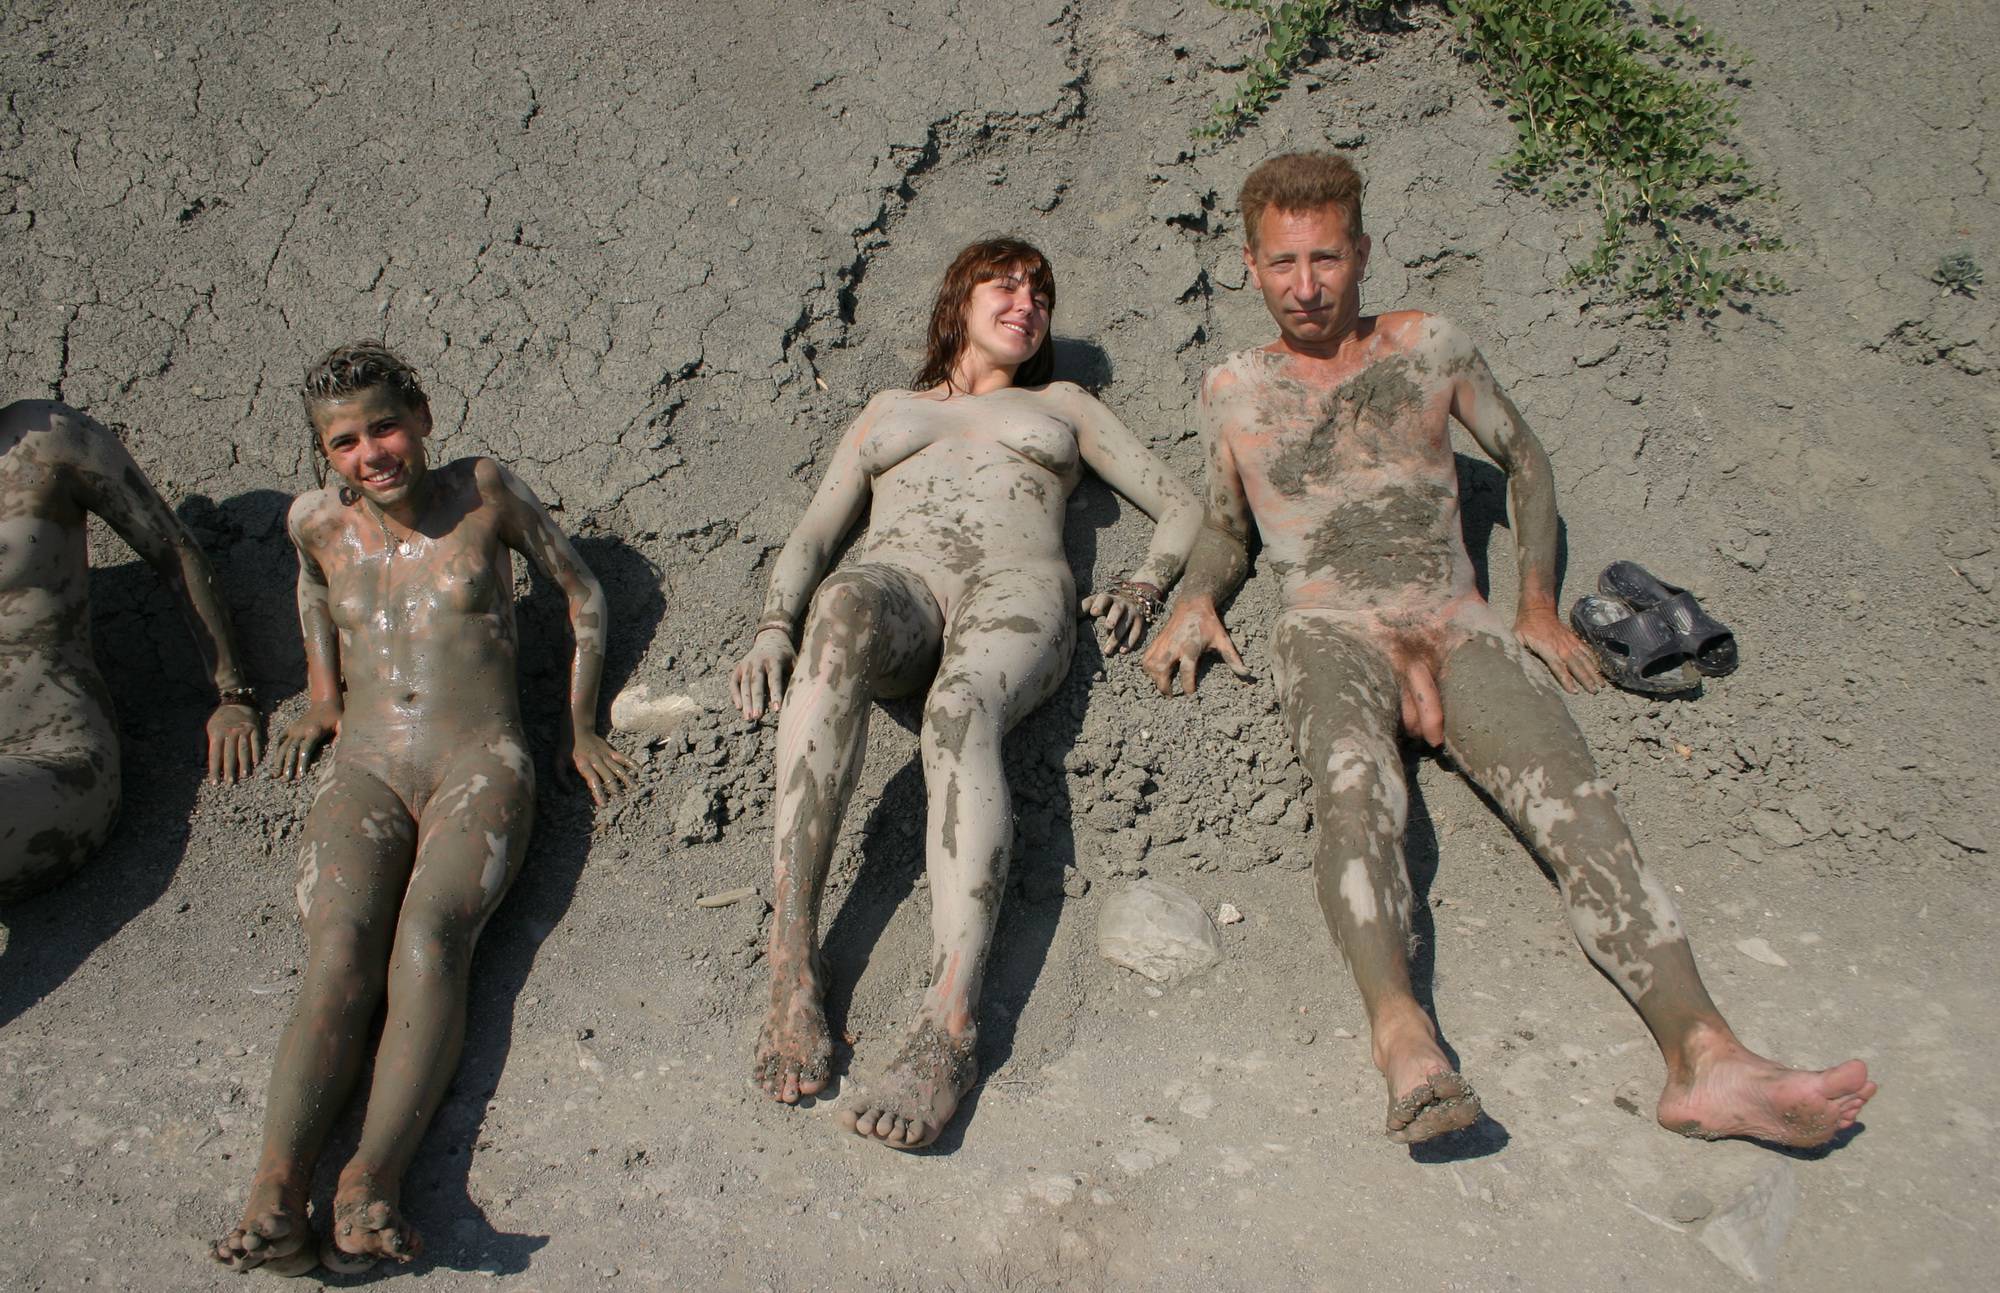 Family Nudism Pics - Mud Sand Family Groups - 2